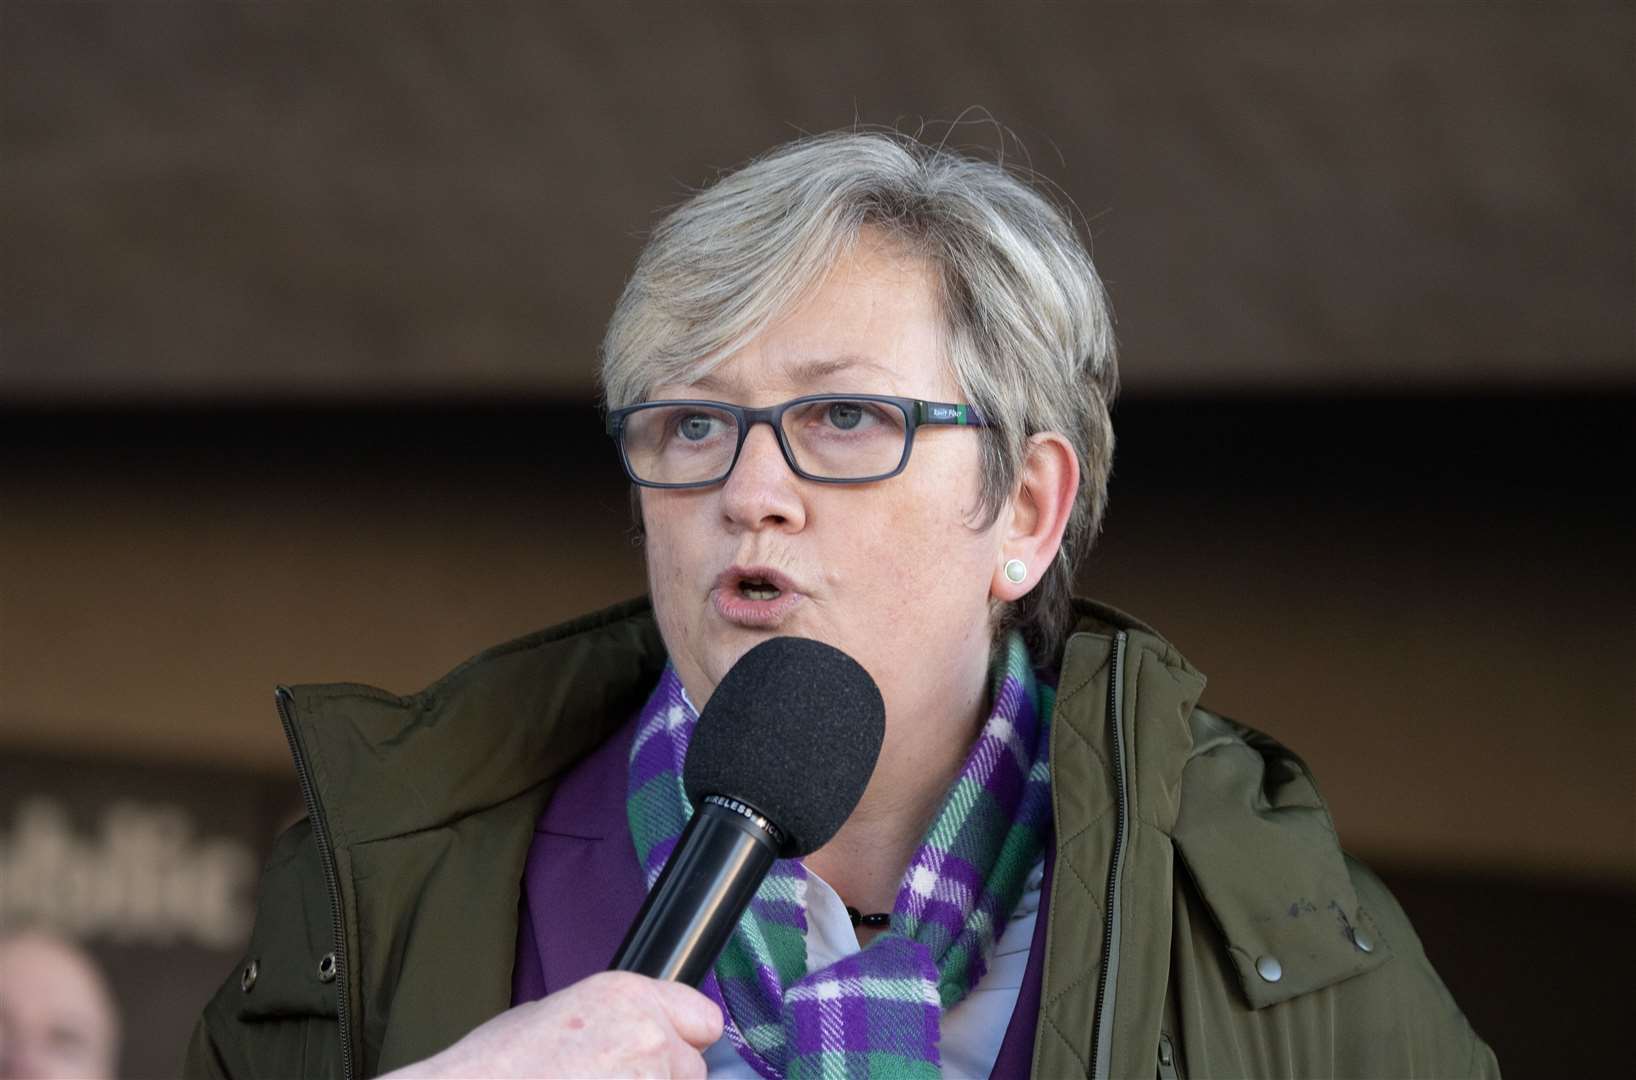 Joanna Cherry, who has clashed with Nicola Sturgeon particularly over gender issues, called for ‘reform and healing’ in their party (Lesley MArtin/PA)